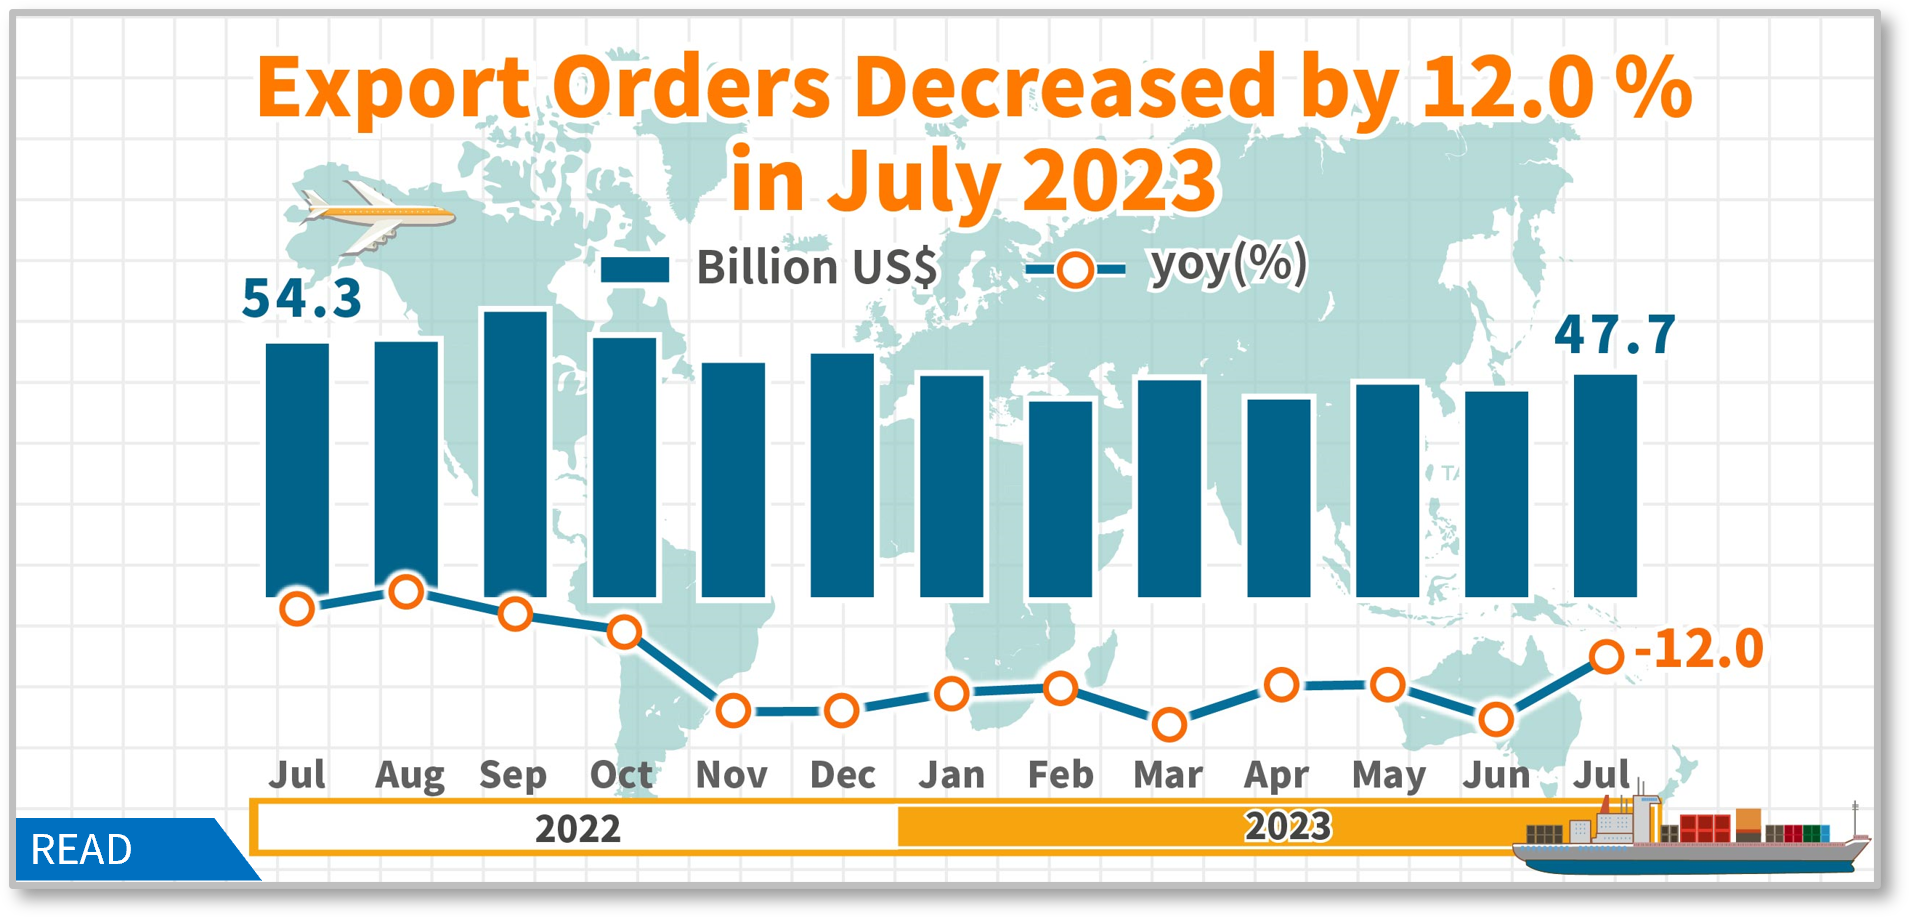 Statistical News: Export Orders in July 2023